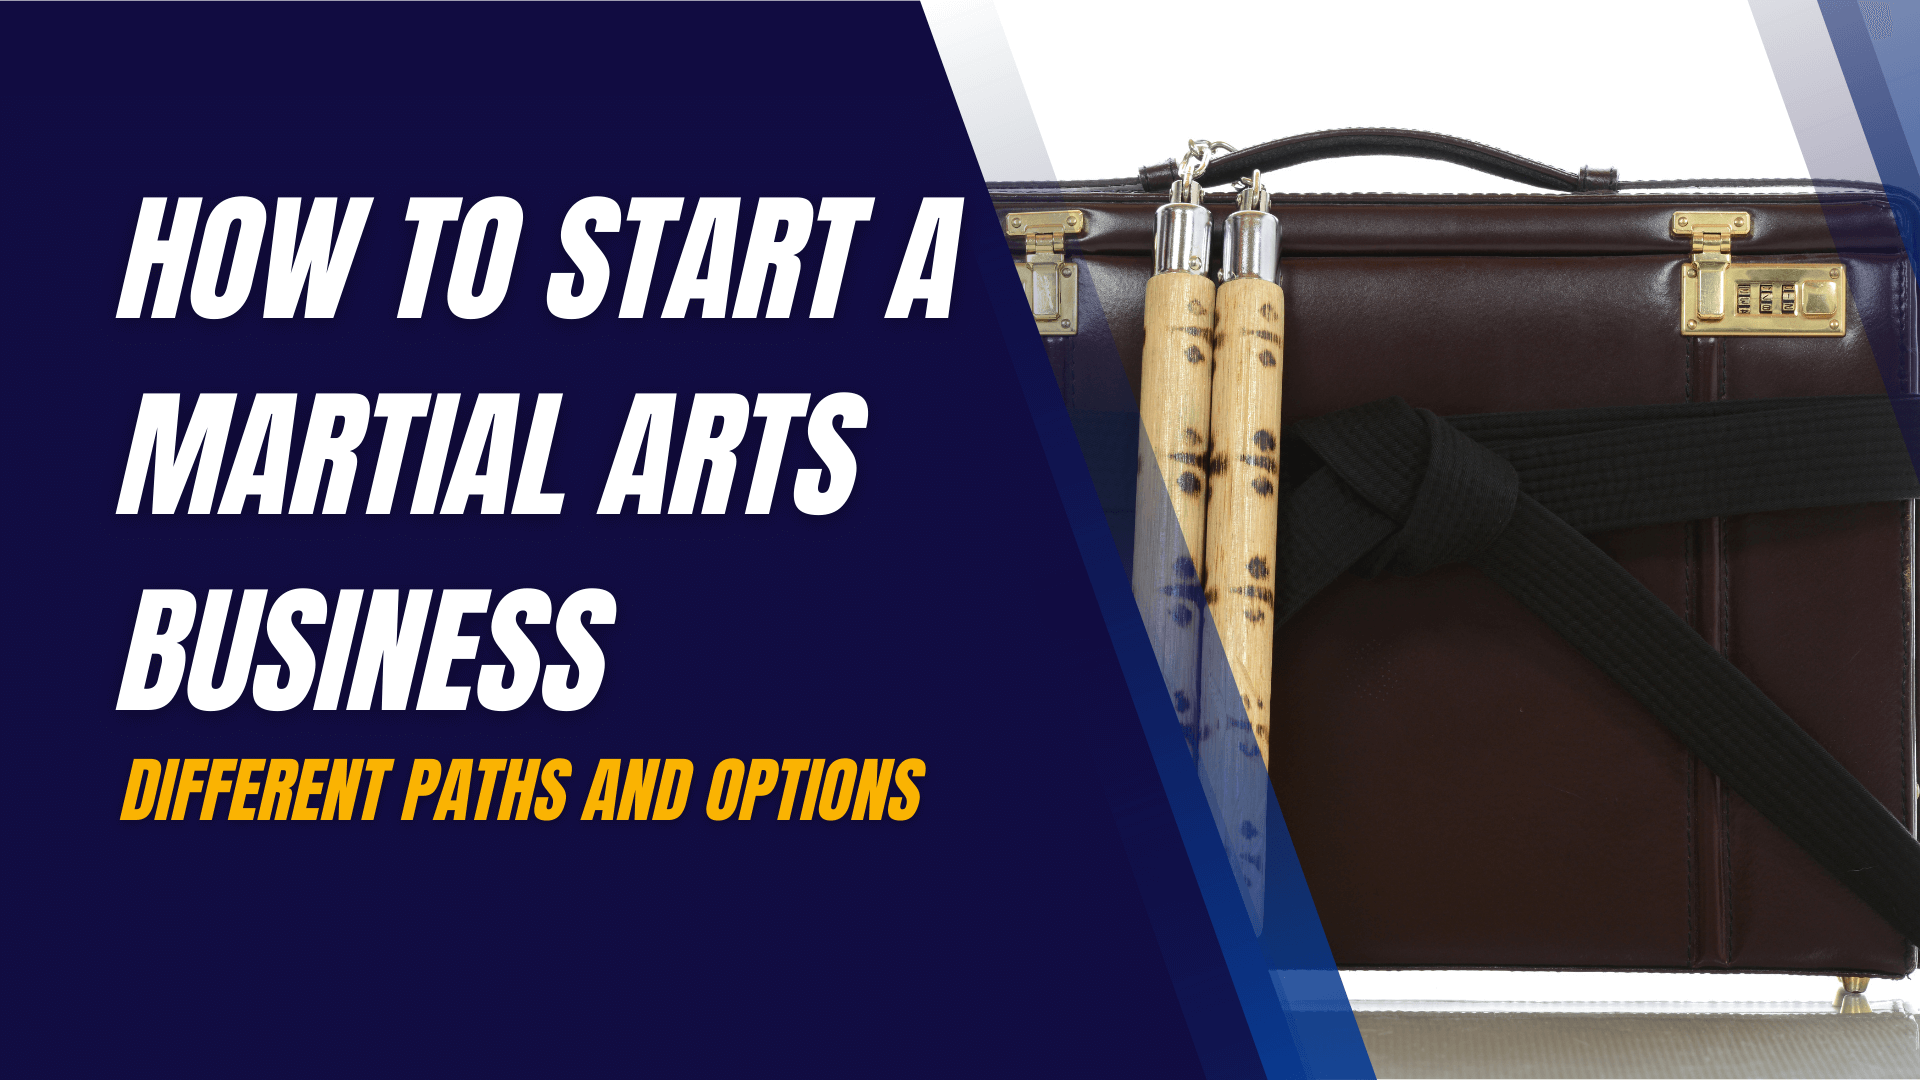 How to Start a Martial Arts Business: Different Paths and Options